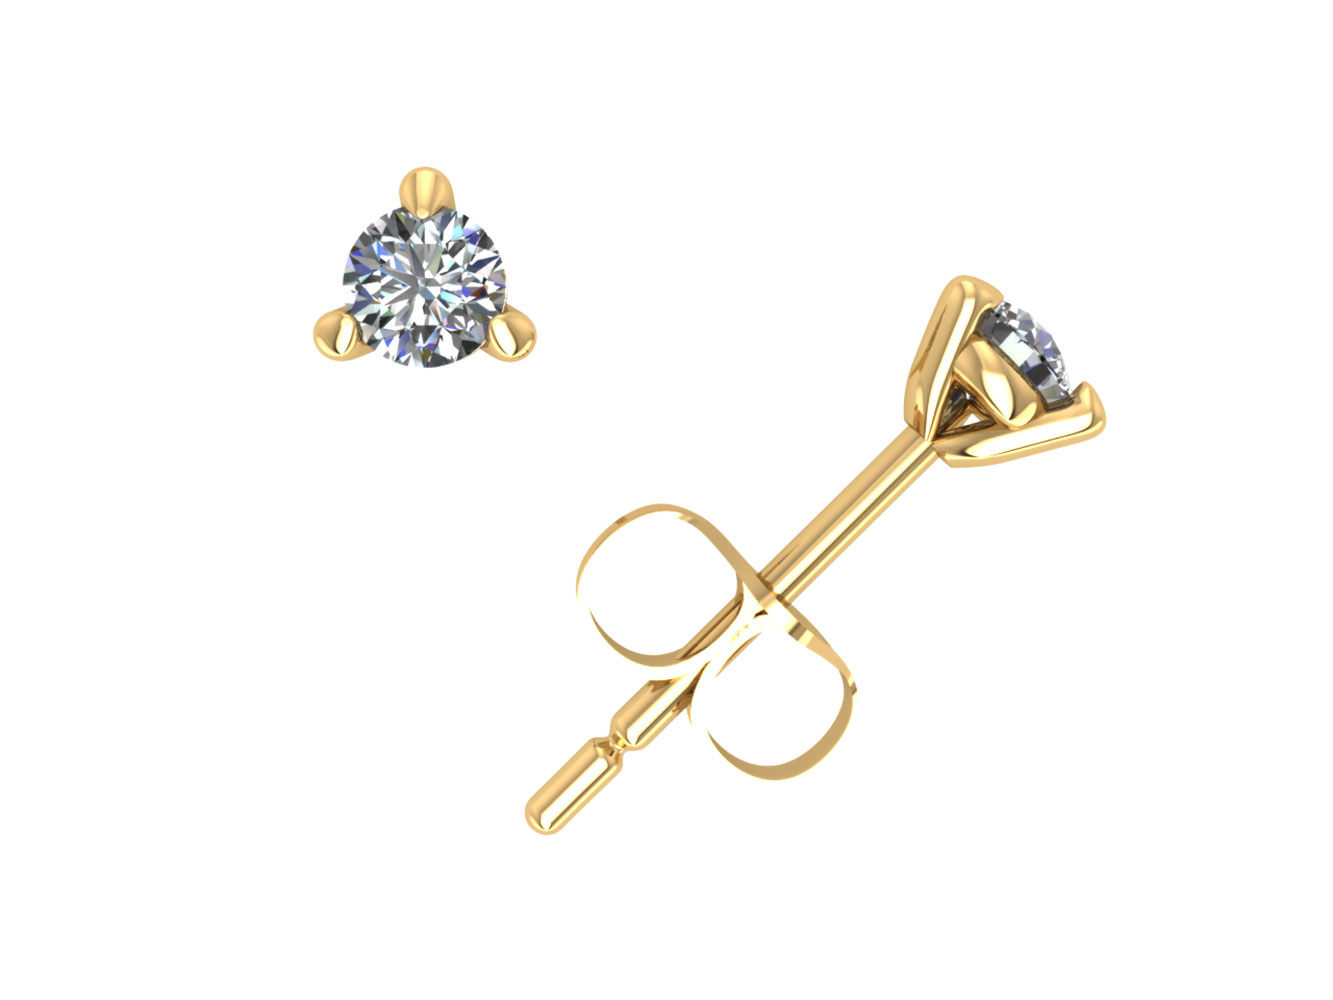 Jewel We Sell 0.15CT Round Diamond Martini Stud Earrings 14k White or Yellow Gold 3Prong Push Back GH I1